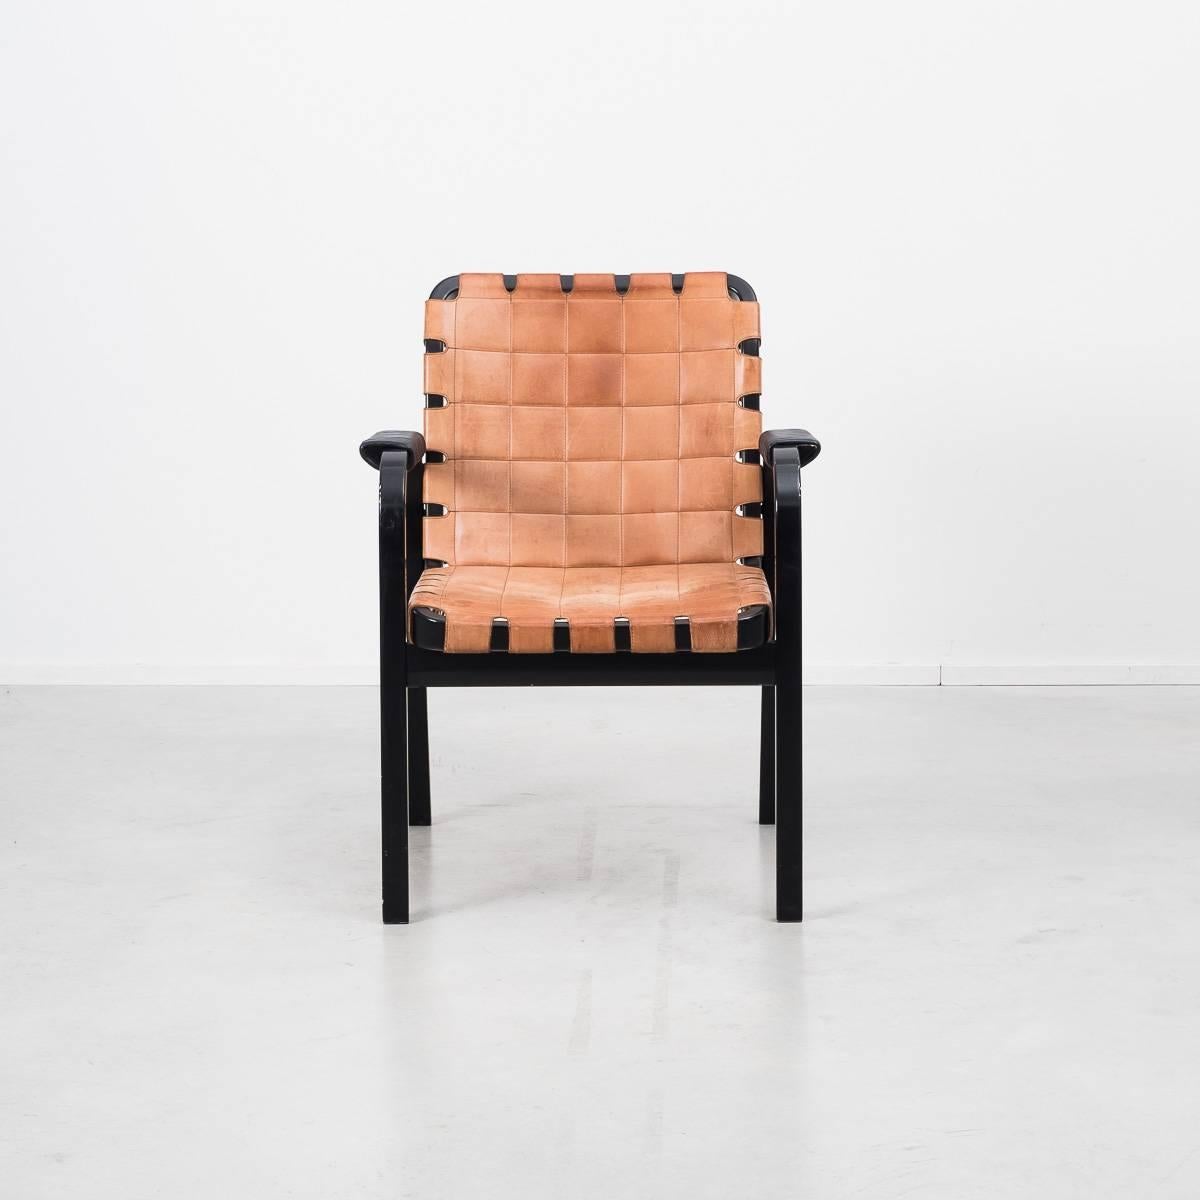 Aalto designed this Classic armchair in 1947 and it remains a sought-after example of his uniquely functional aesthetic. Produced in 1975 from a solid laminated birch frame which supports the quilted tan leather webbing. This webbing forms a durable